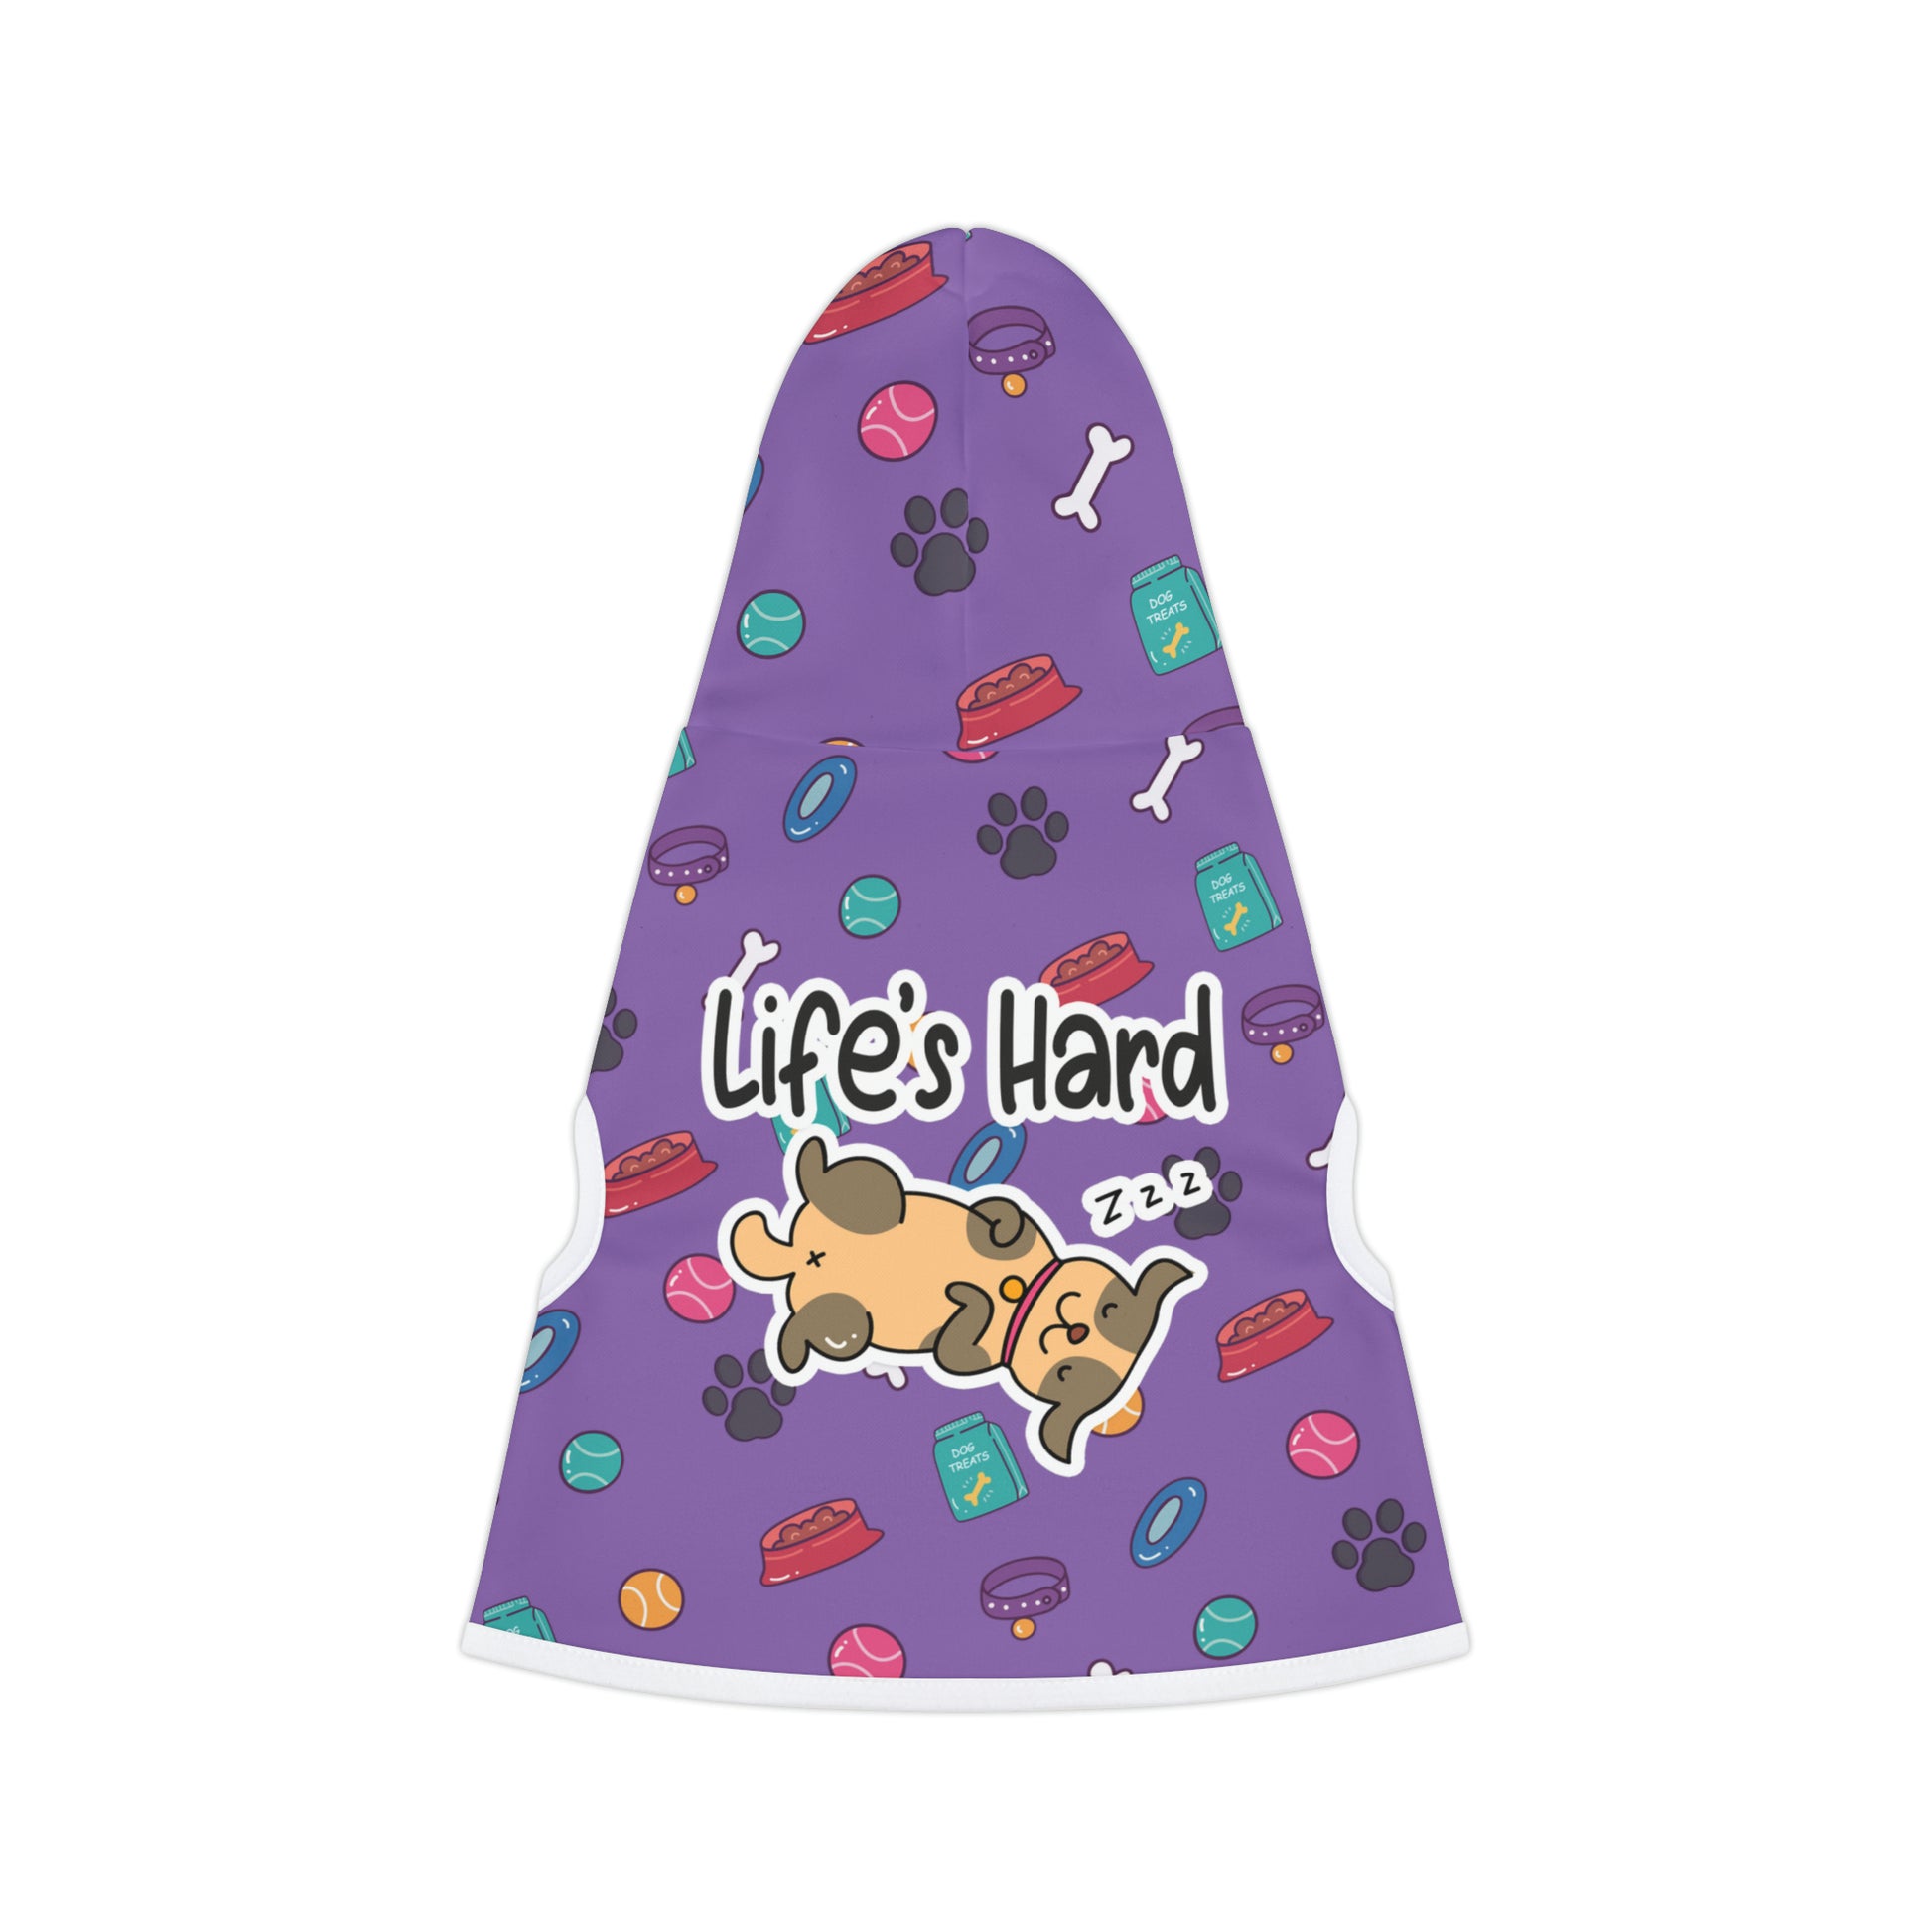 A pet hoodie with a beautiful pattern design featuring all things dog love. A smiling dog sleeping below a message that says "Life's hard". Hoodie's Color is purple